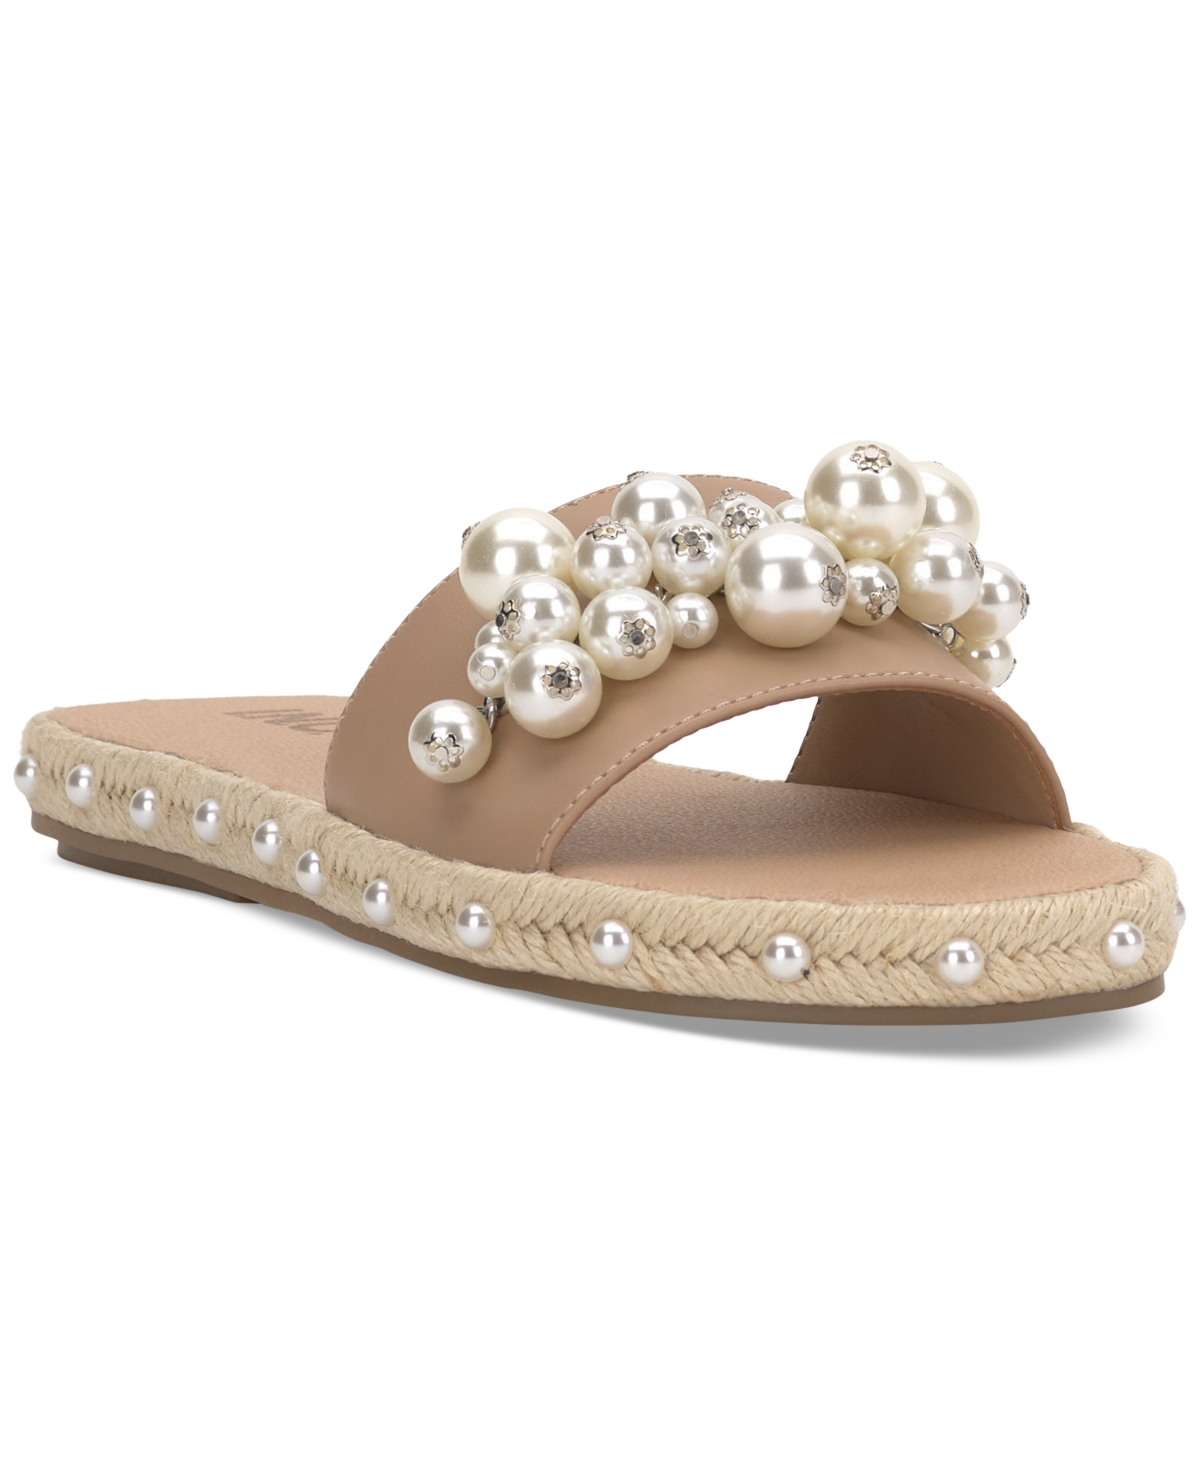 Women's Majorie Espadrille Flat Sandals, Created for Macy's - Pearl